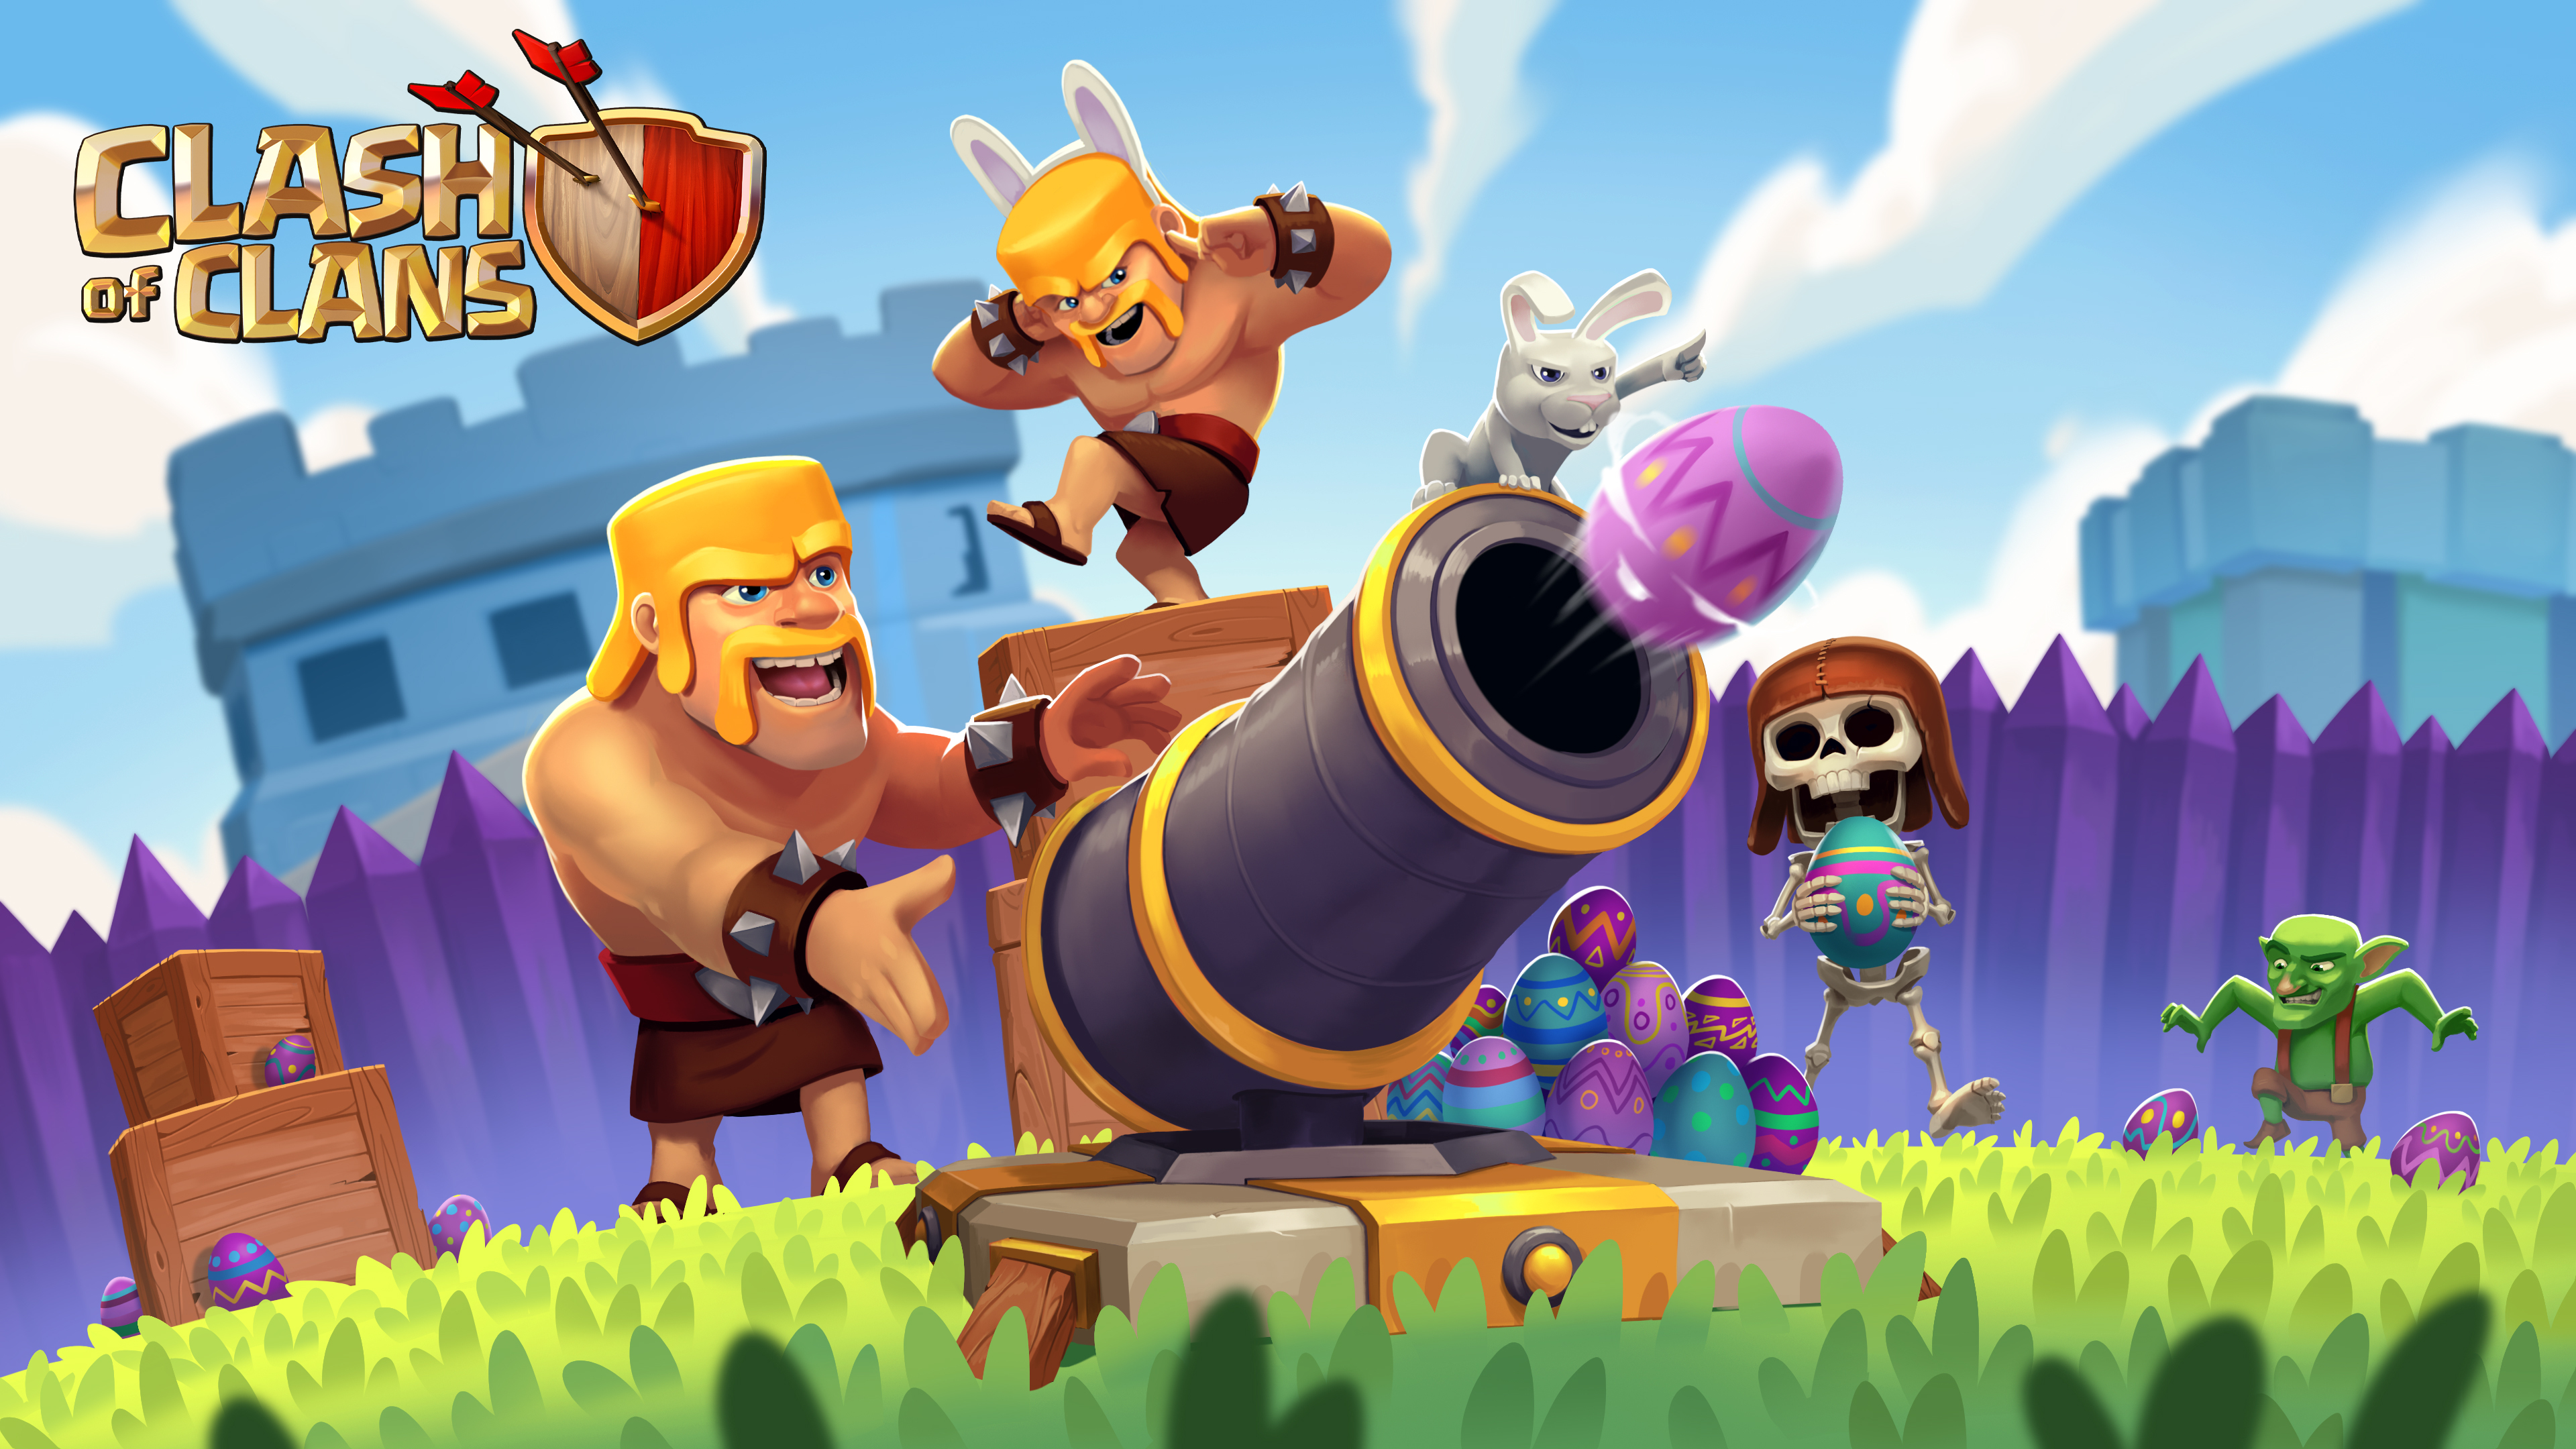 Clash of Clans on Twitter: "R.A.B.B.I.T comes out to play 🐰 #HappyEaster if you celebrate, Chiefs! 🍫 🐣 https://t.co/tUWHwLHkzi" / Twitter